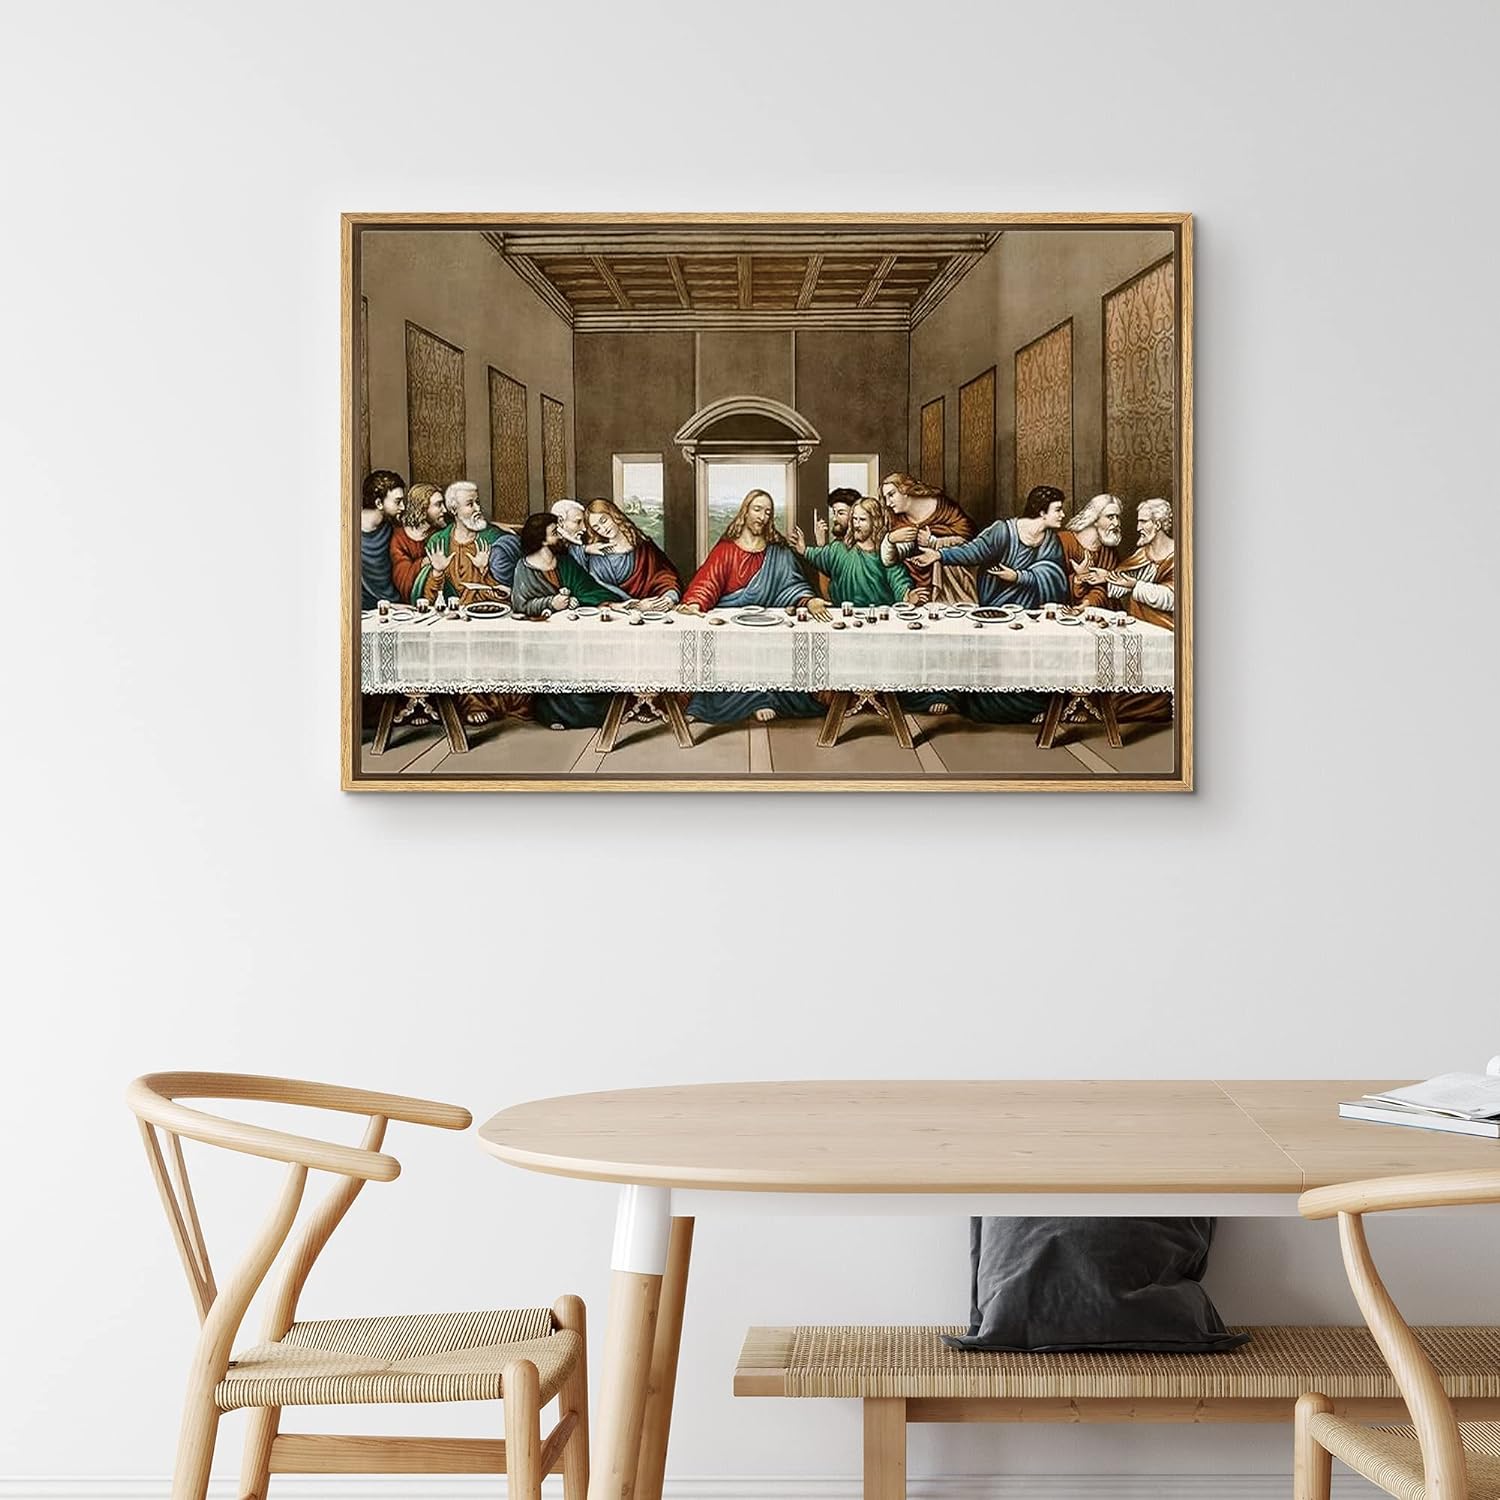 IDEA4WALL Framed Canvas Wall Art for Living Room, Bedroom La Ultima Cena Cuadro The Last Supper by Leonardo Da Vinci Canvas Prints for Home Decoration Ready to Hanging - image 5 of 5